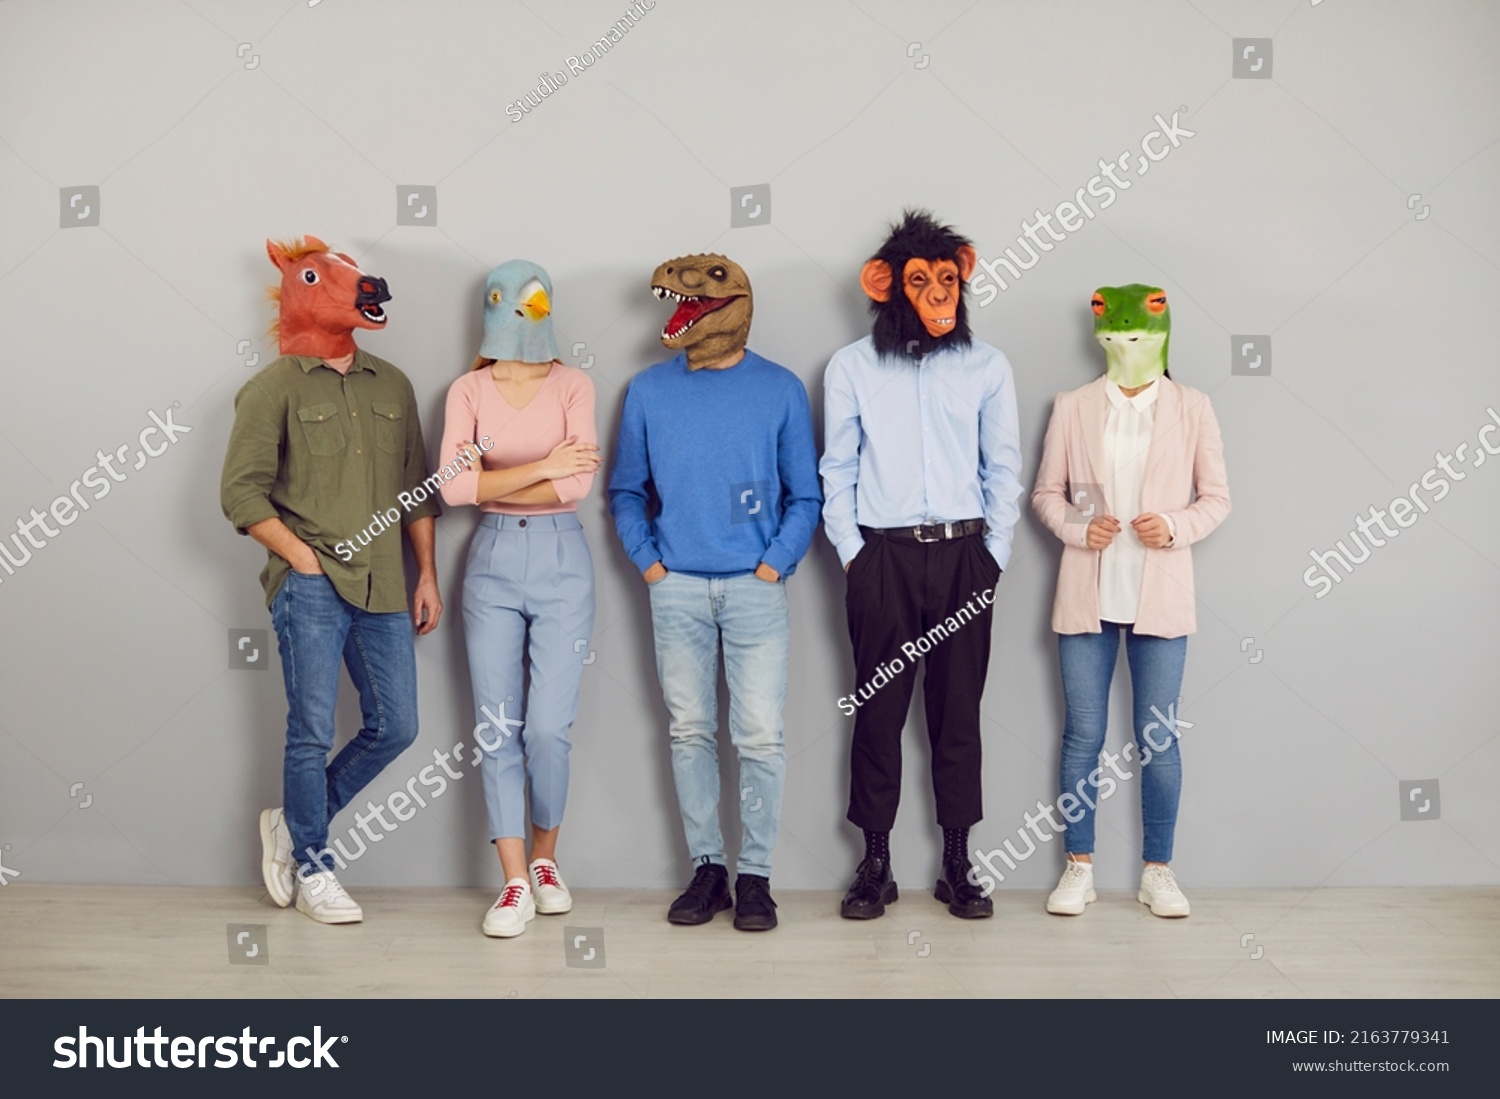 Funny half people half animals waiting by office wall together. Group portrait company workers, students or job applicants wearing extravagant wacky absurd comedy fancy dress carnival masquerade masks #2163779341